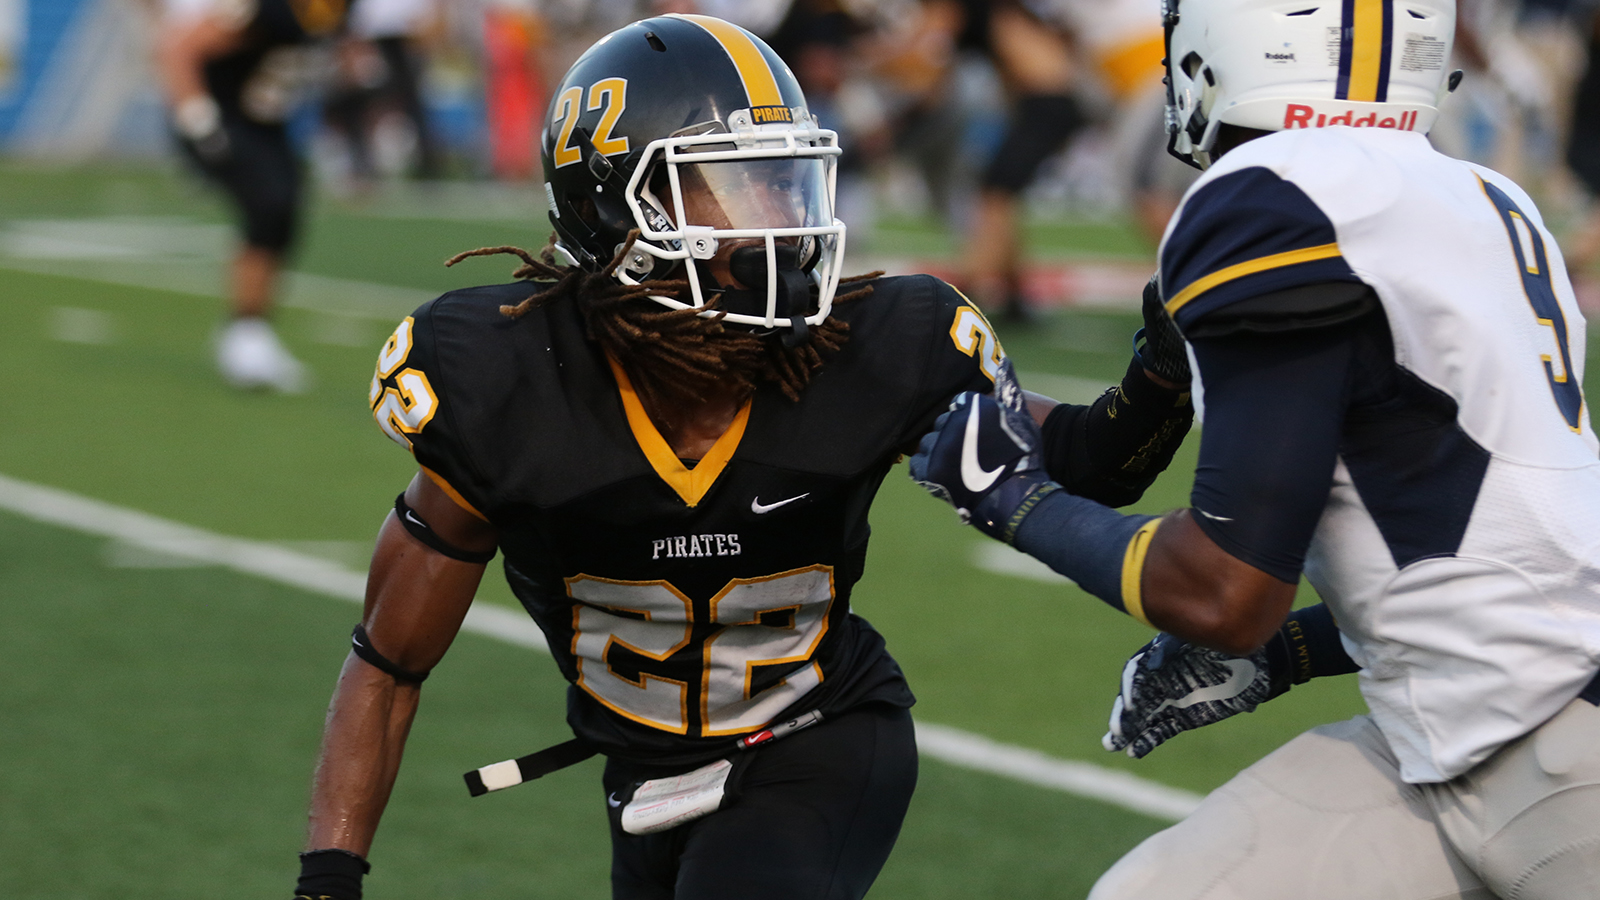 Pirates Can't Cash in on Opportunities in Conference Loss to ETBU